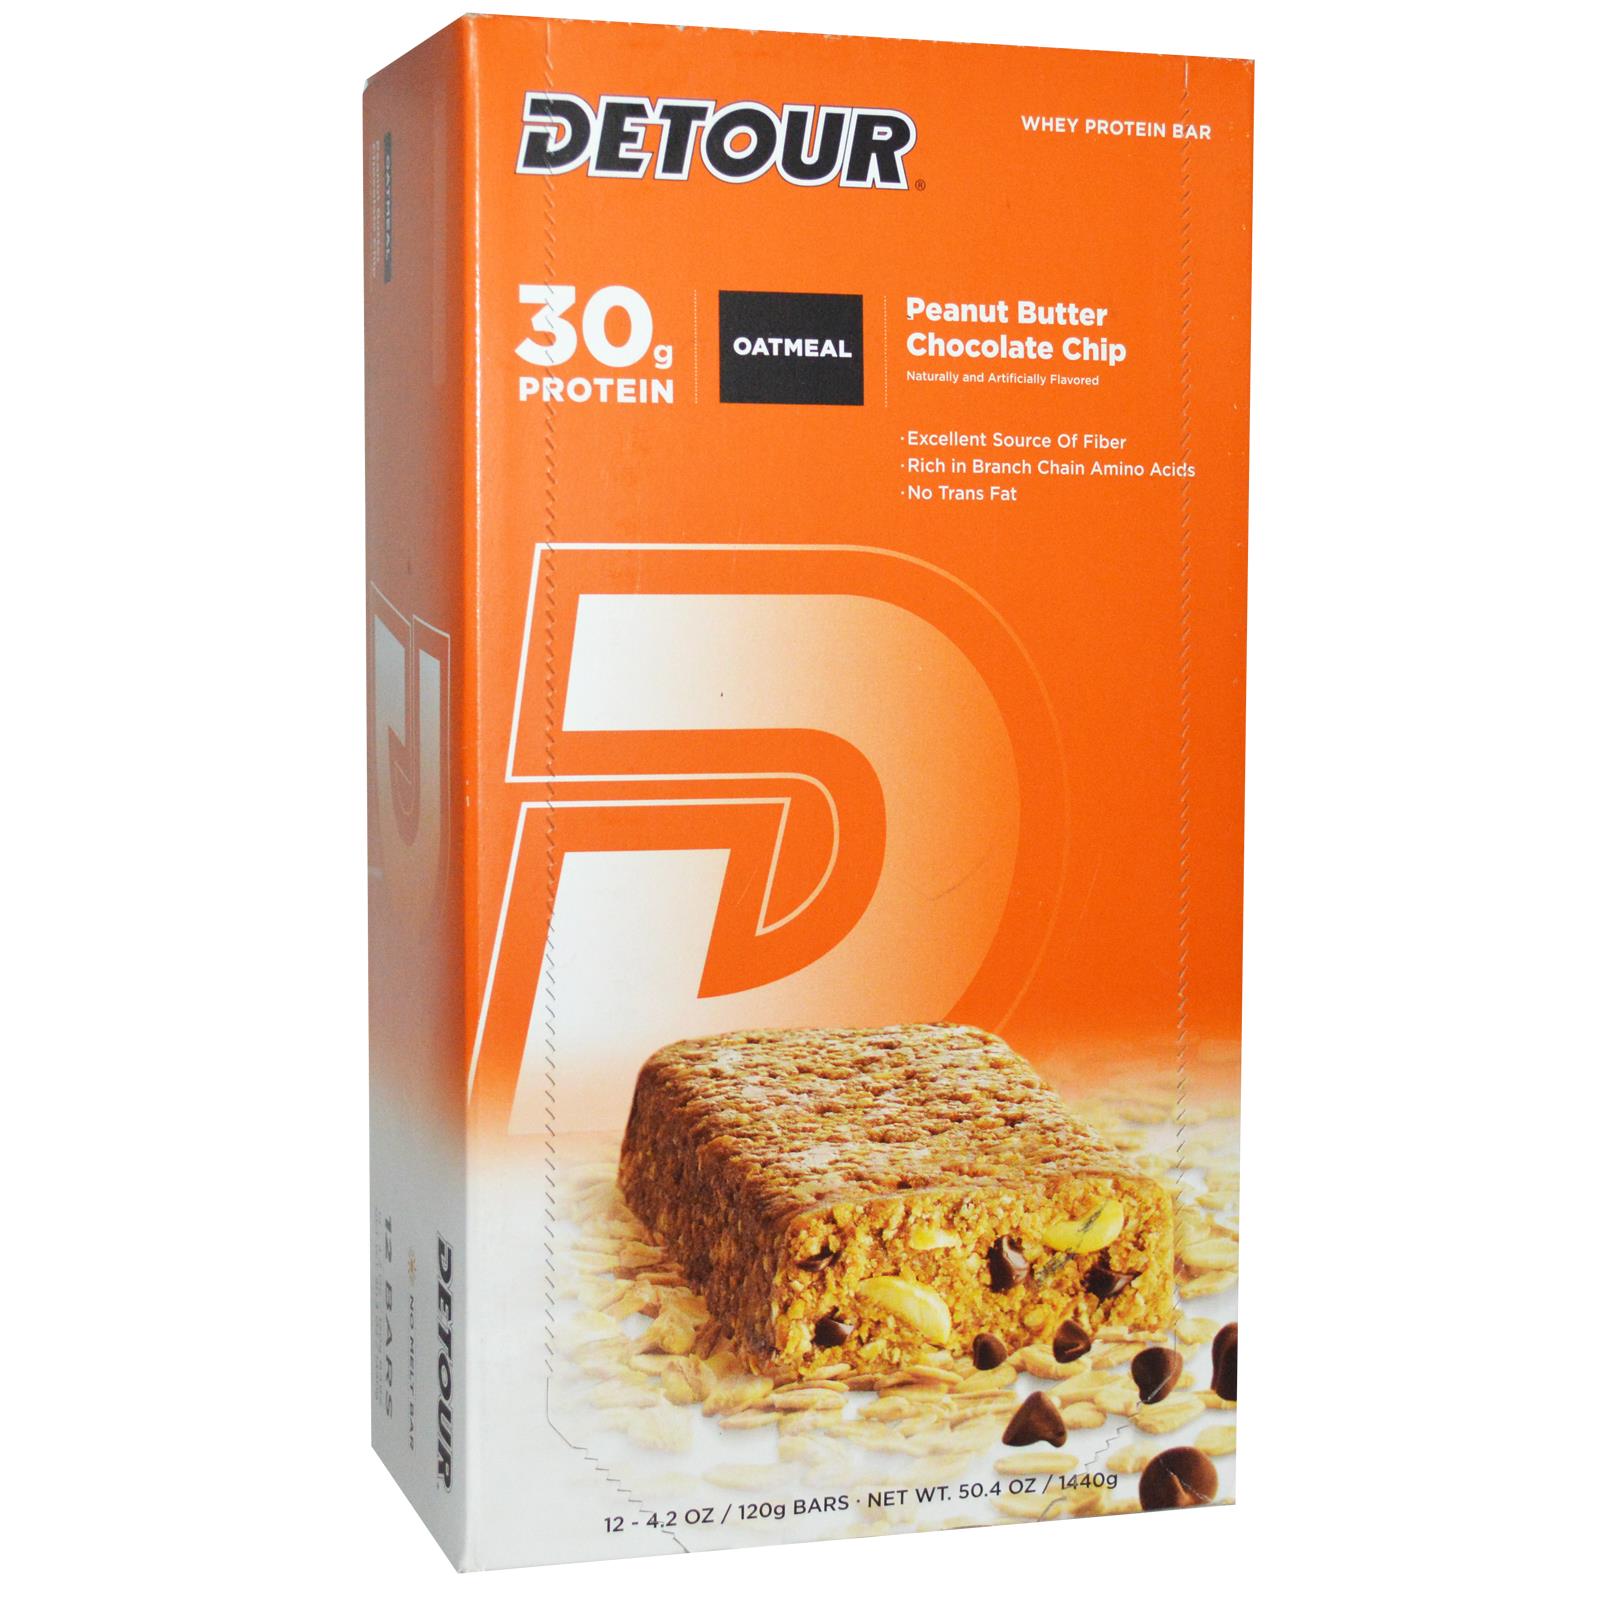 Detour Oatmeal Whey Protein Bar Peanut Butter Chocolate Chip